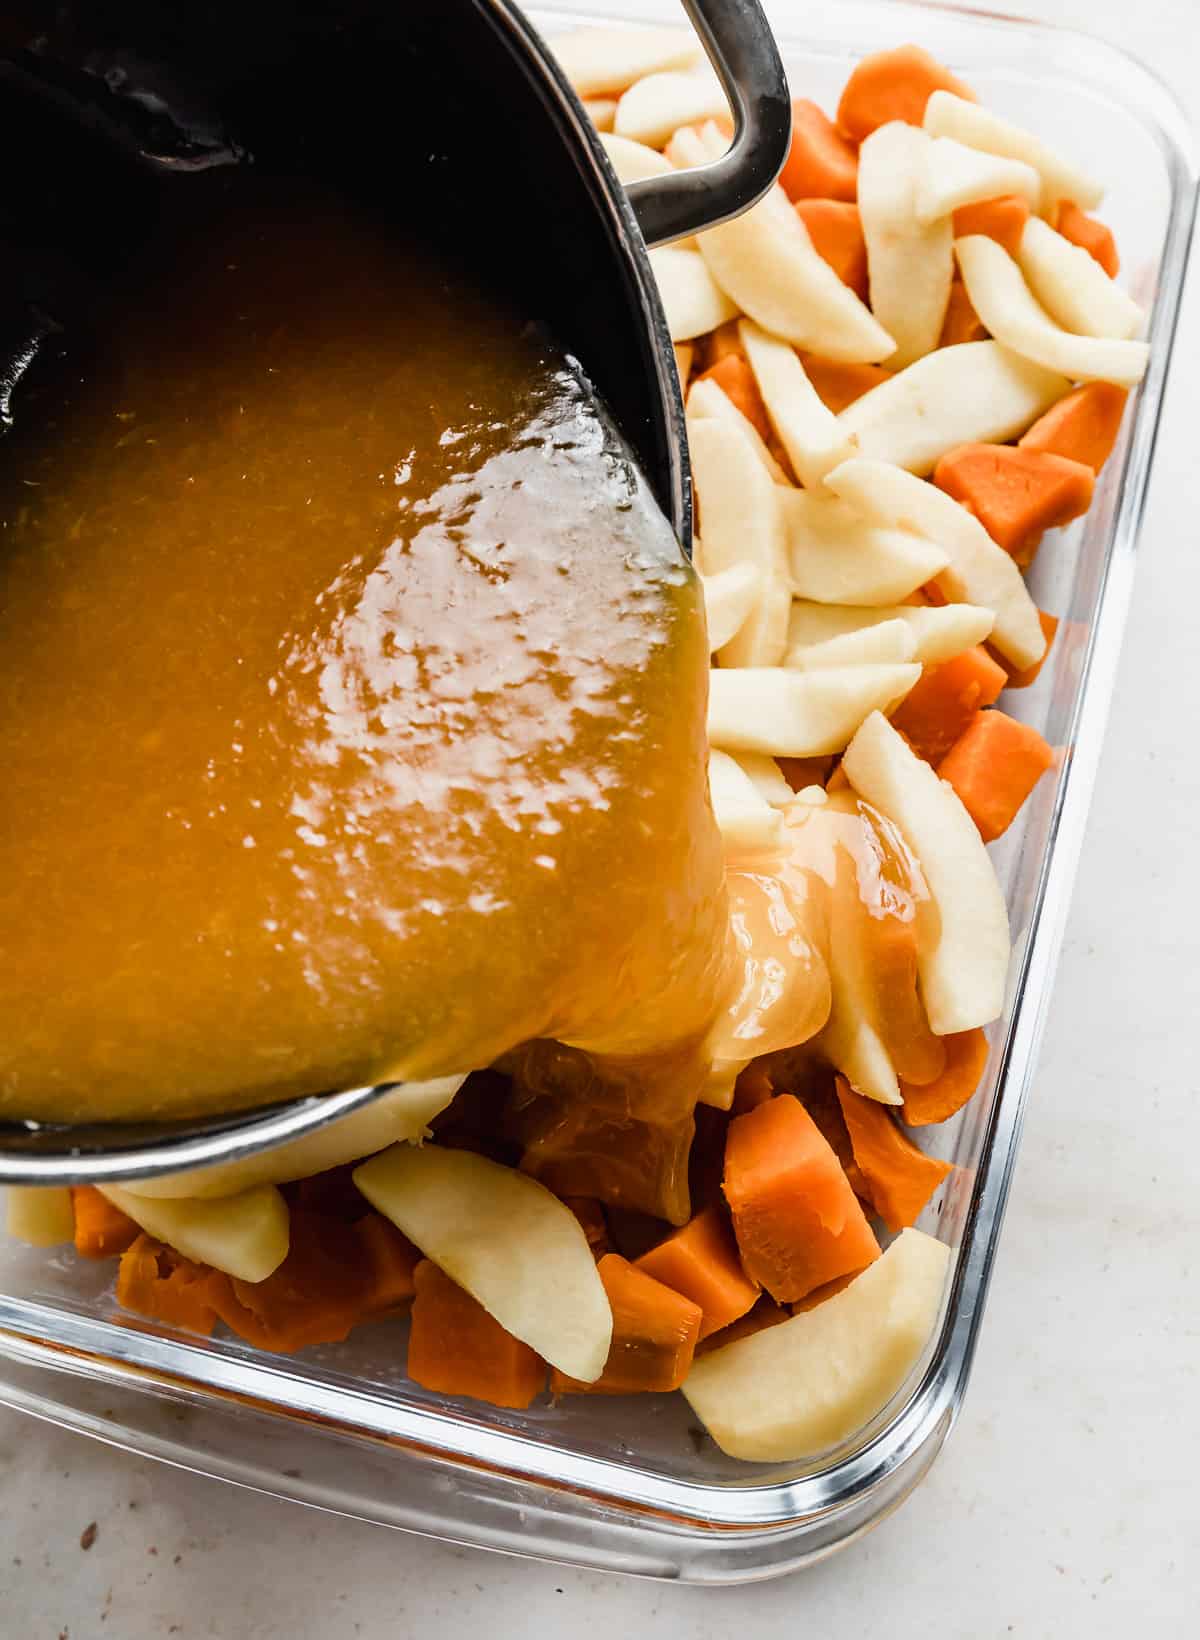 An orange juice sauce being poured over cubed sweet potatoes and sliced apples in a casserole dish.